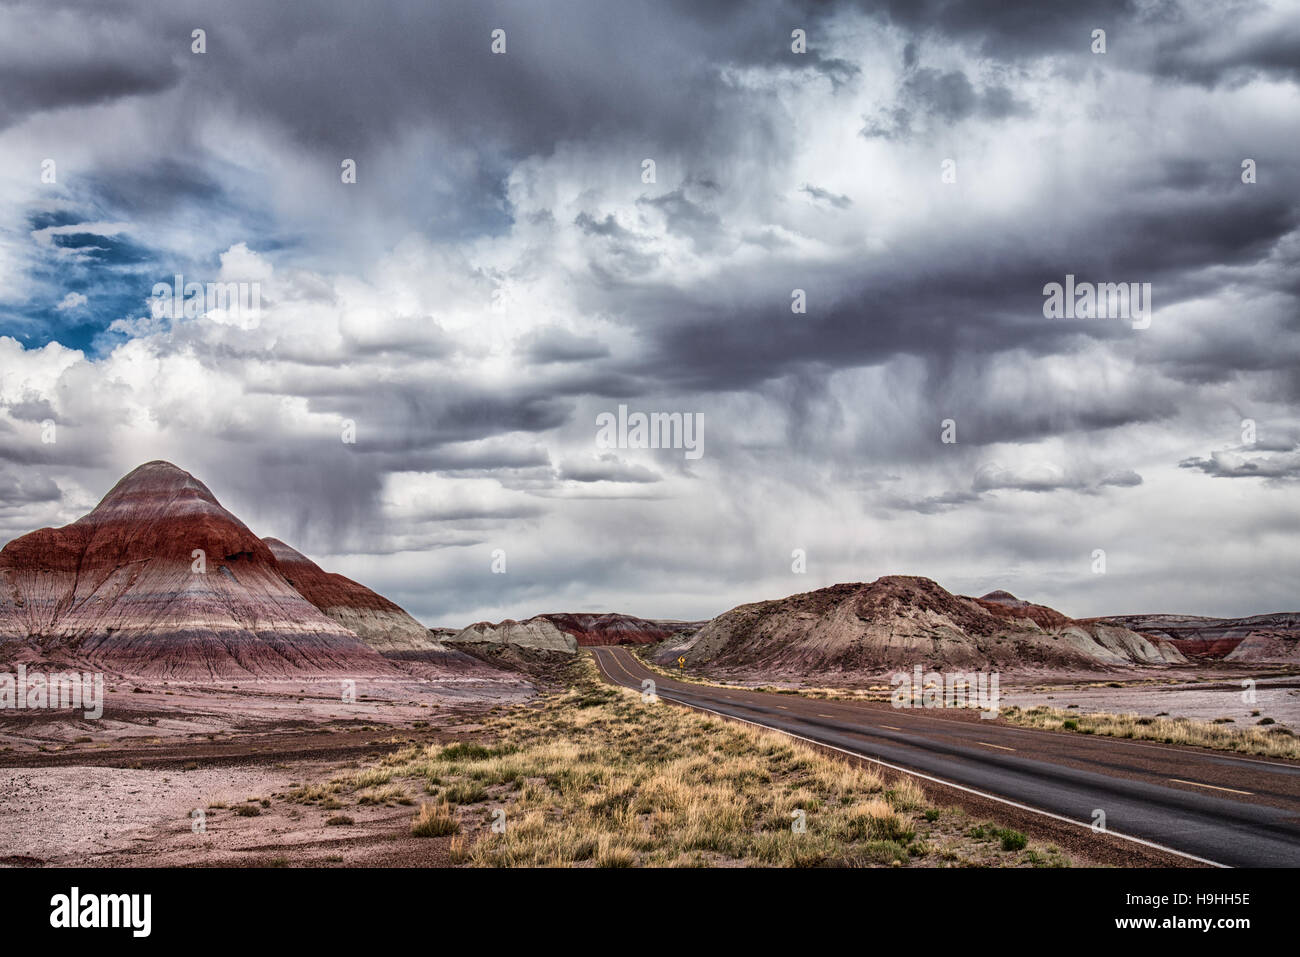 The Tepees  are 'famous' hills found along the drive in the Petrified Forest National Park Stock Photo